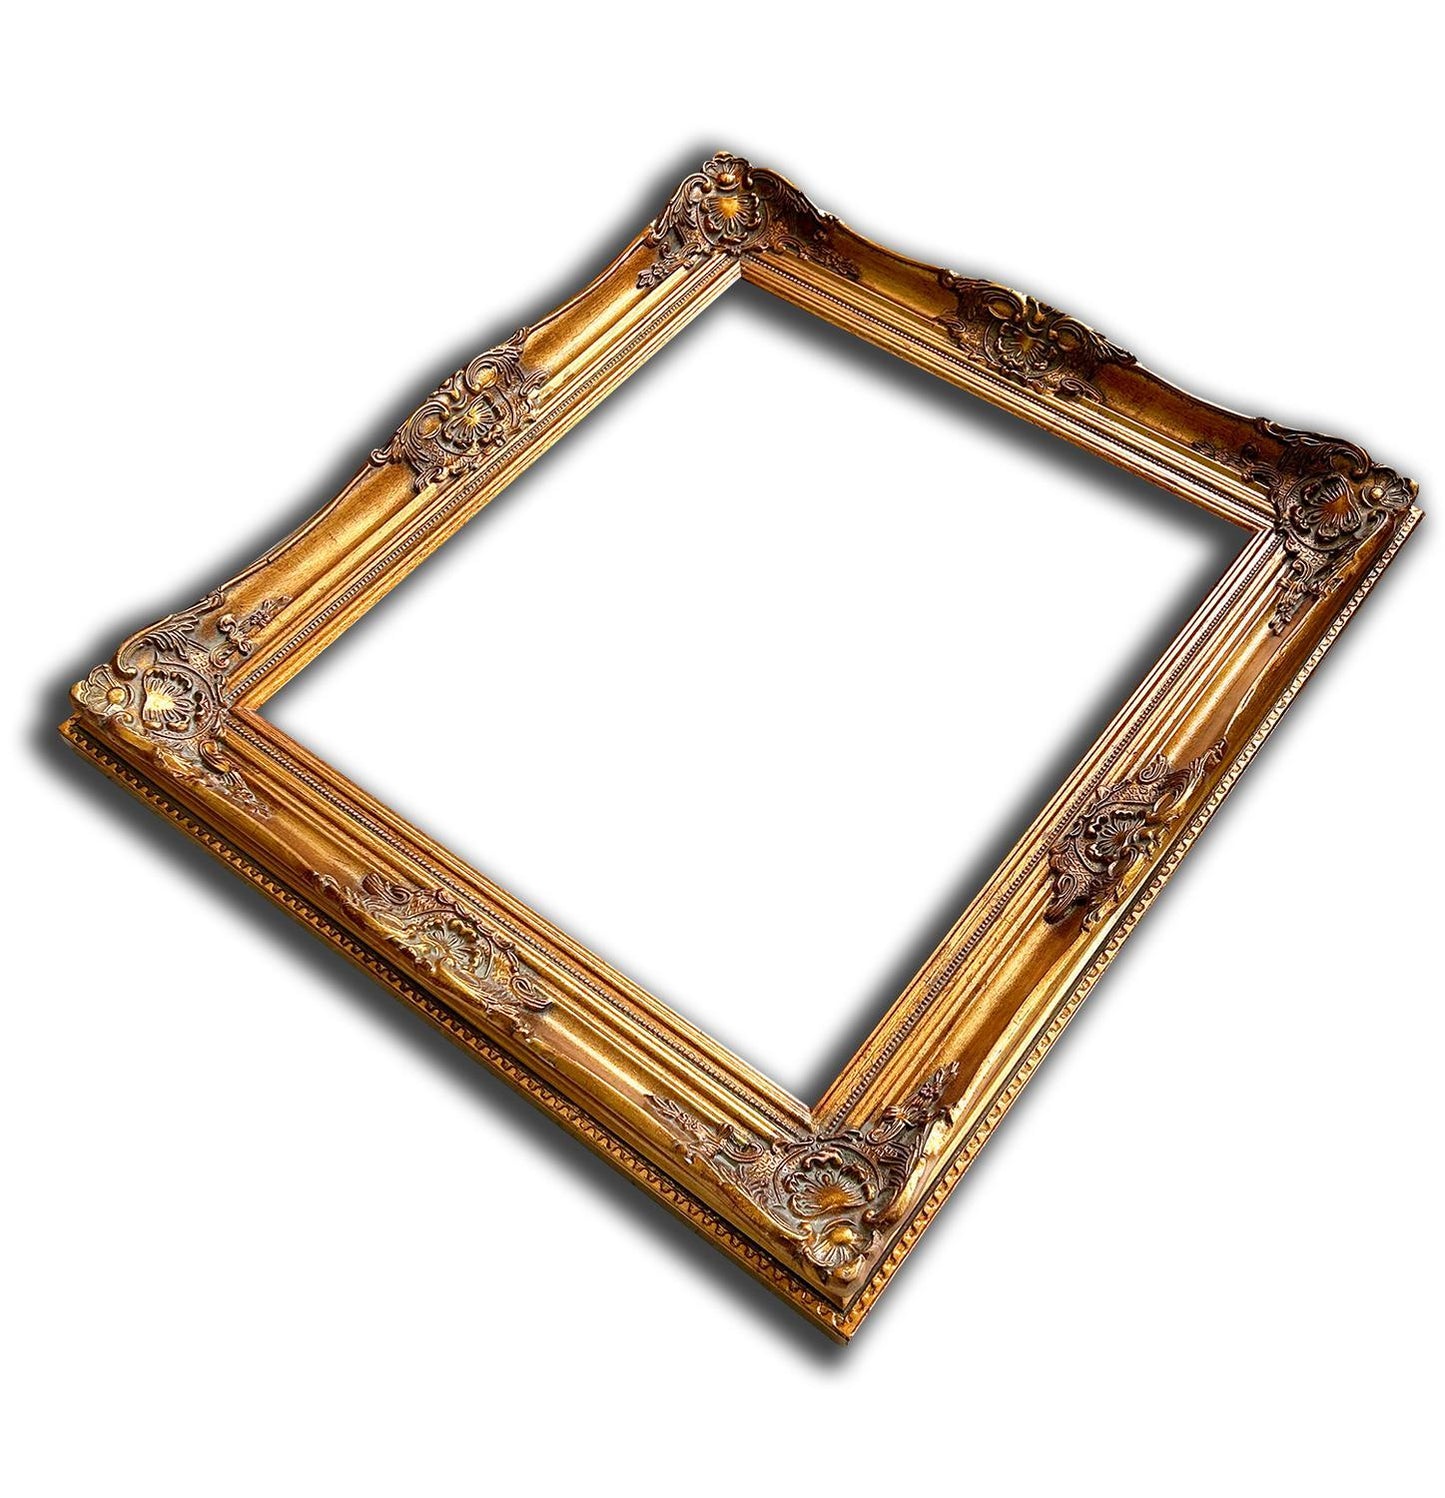 40x47 cm or 16x19 ins, wooden photo frame